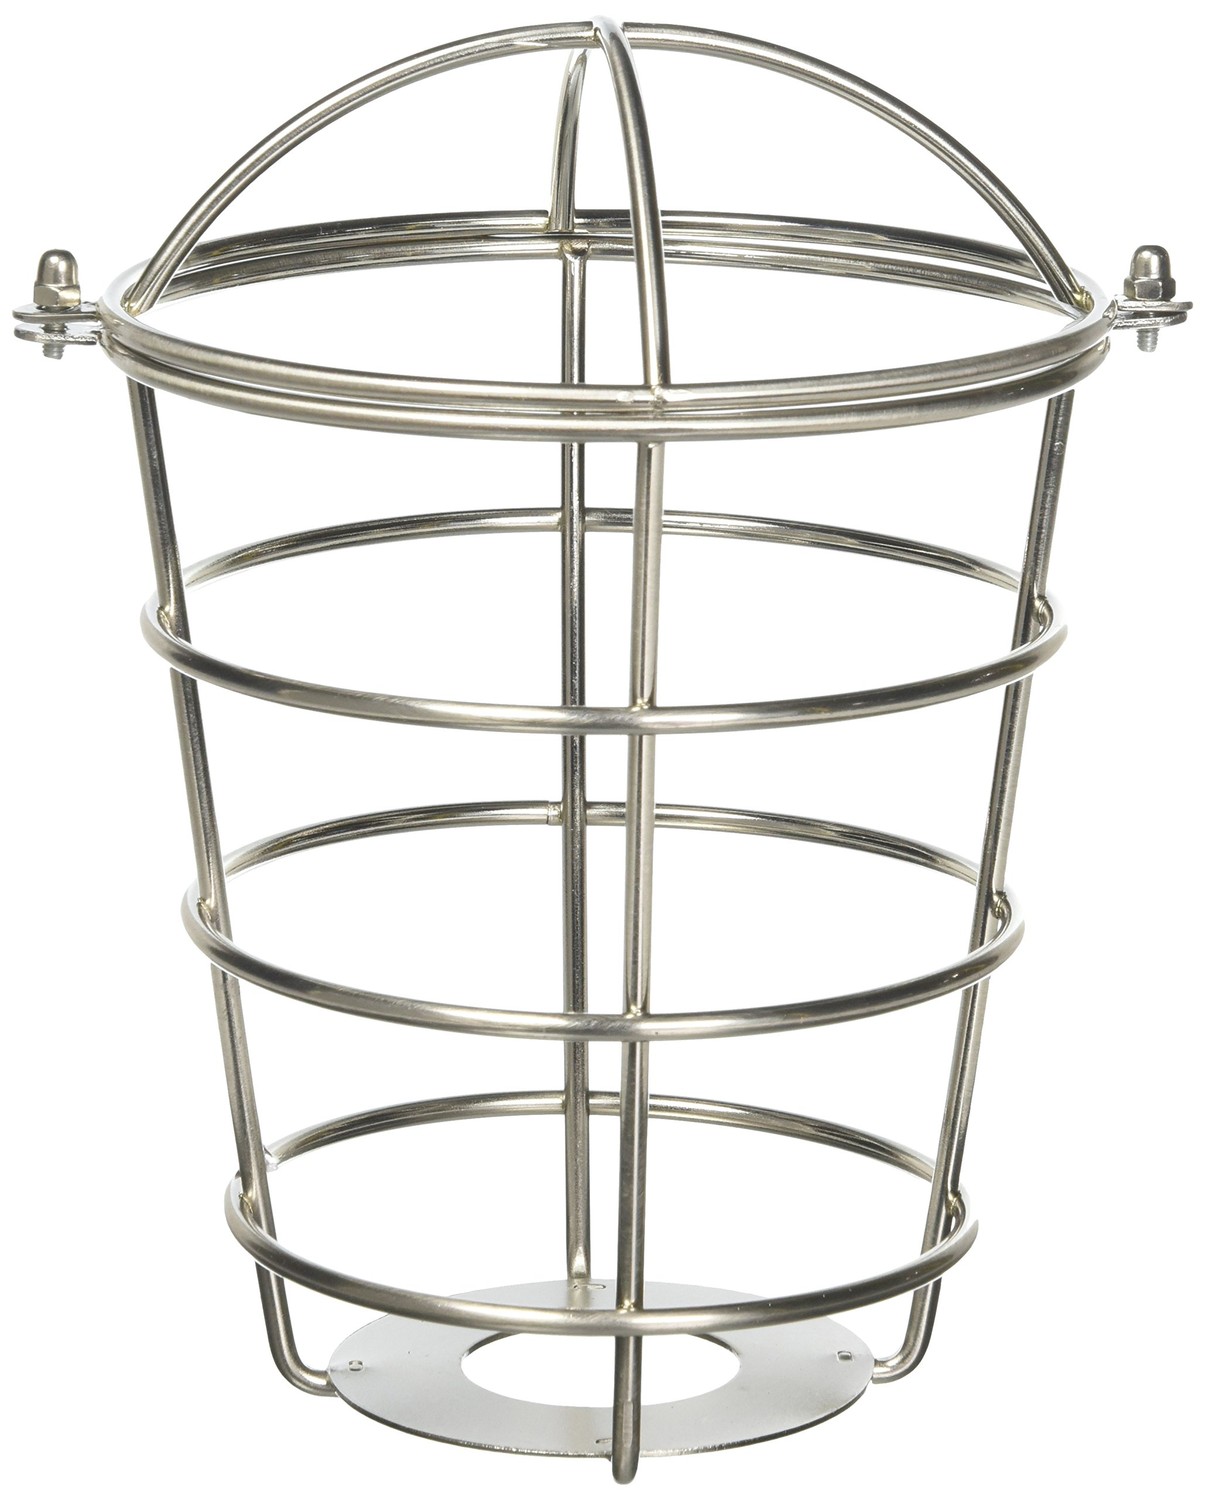 Brushed Nickel Finish Cage Shade with Closed Bottom